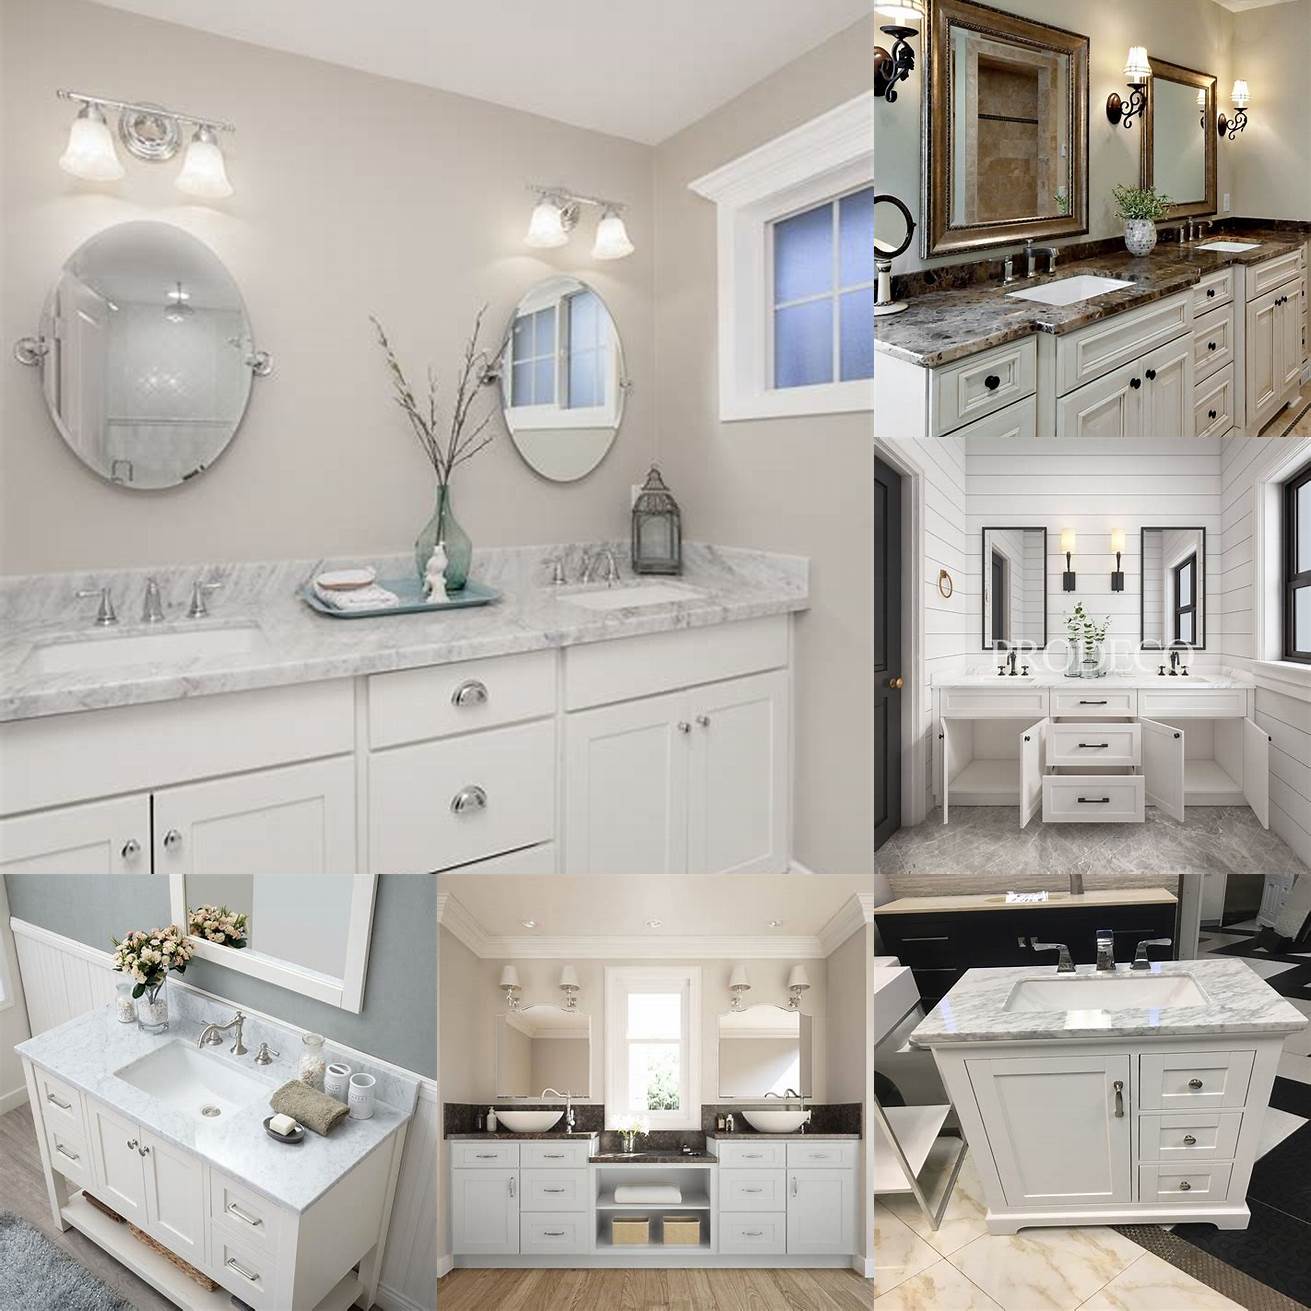 Image Ideas White shaker bathroom vanity with marble countertop